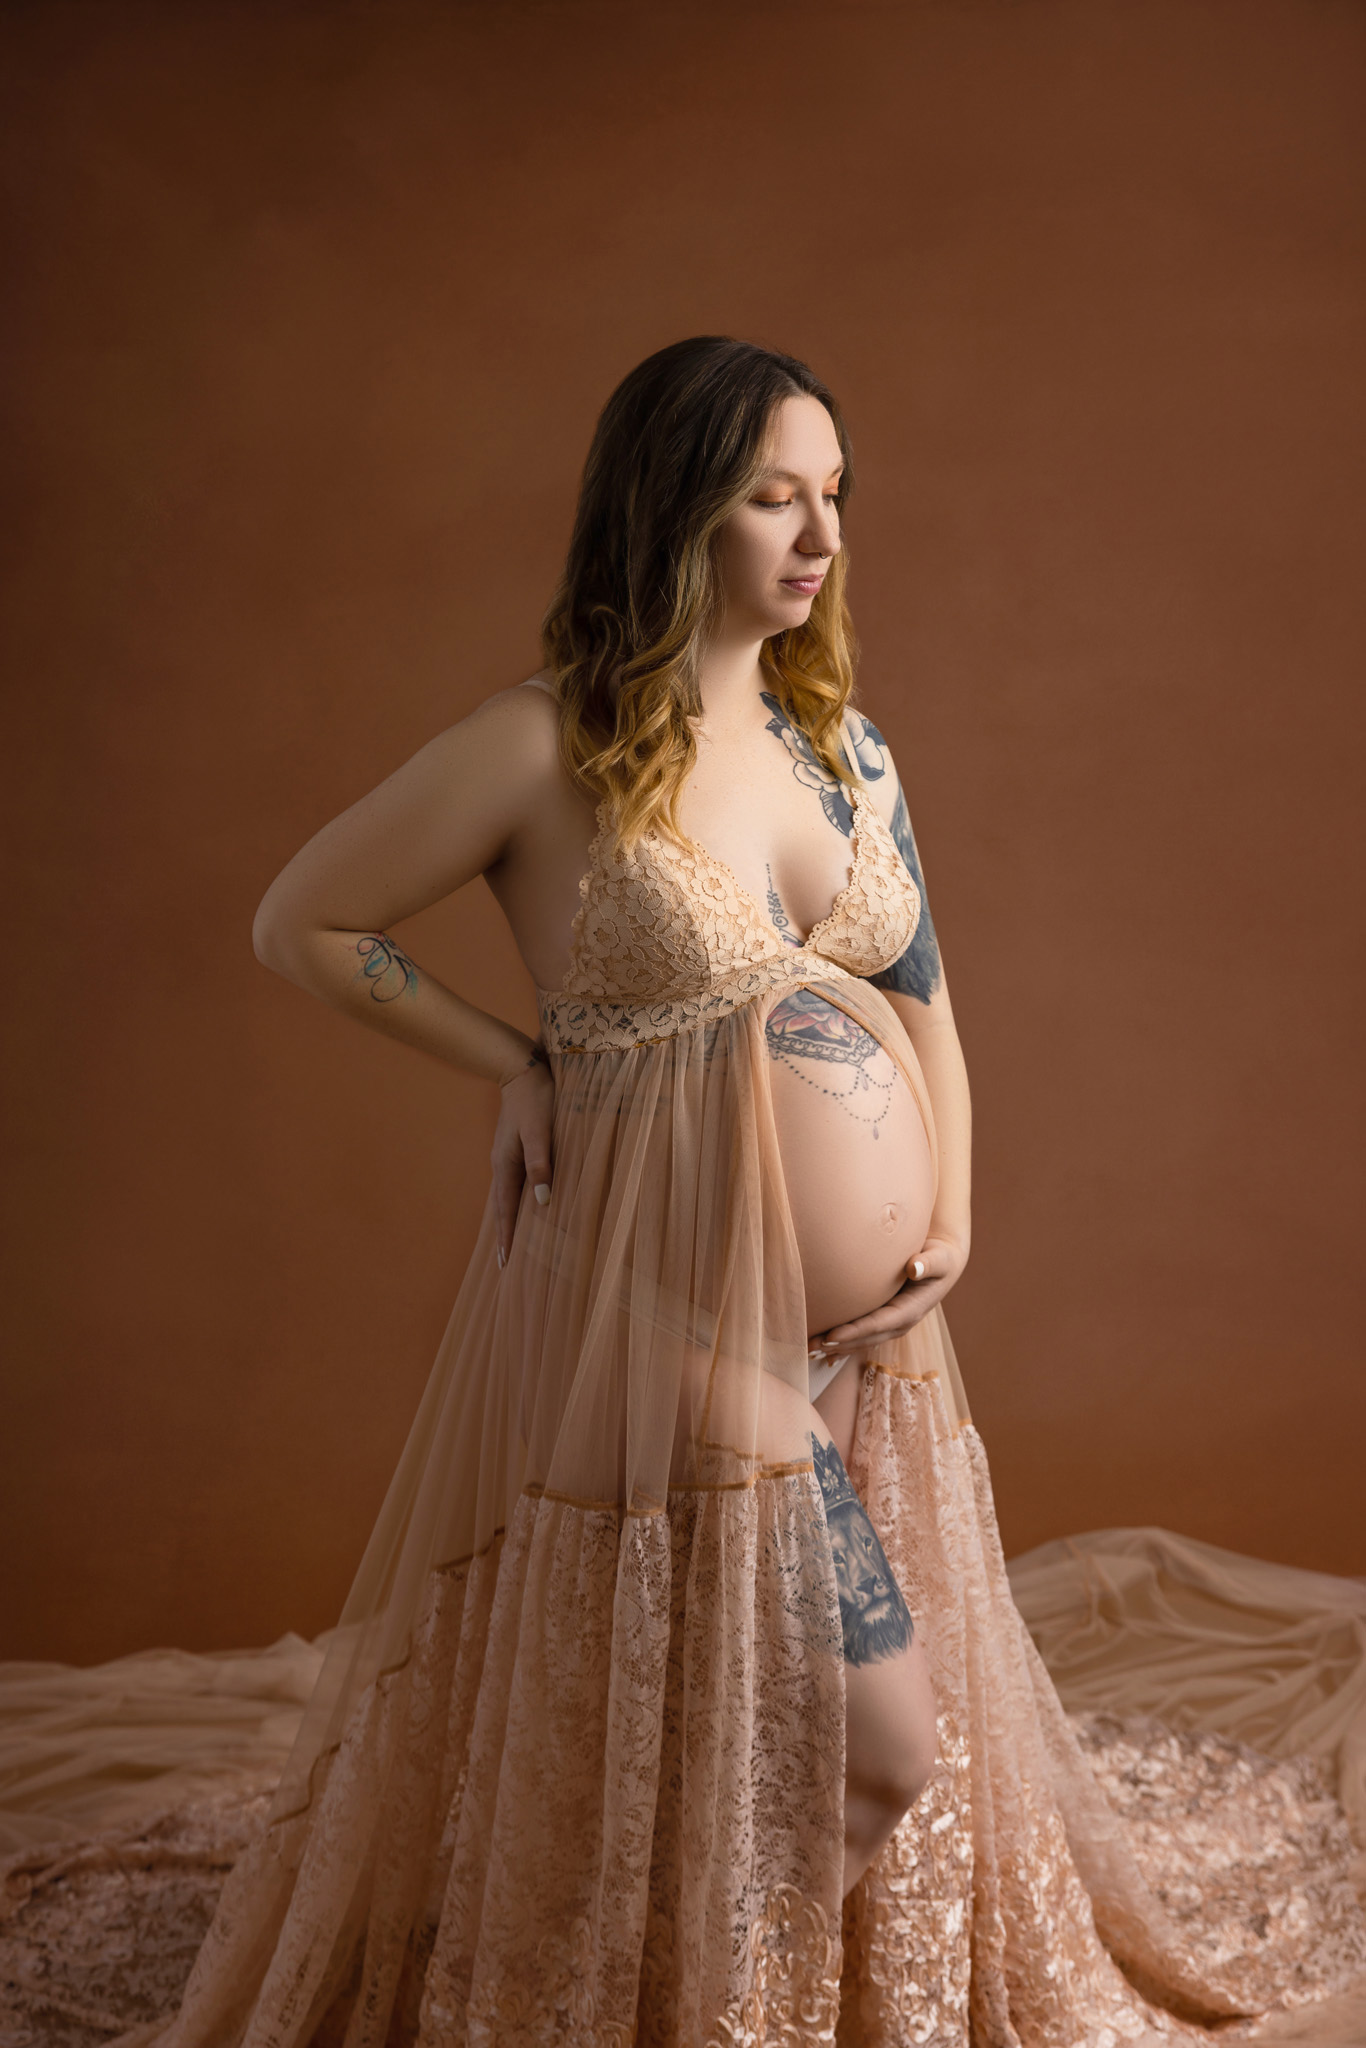 pregnant mom with one hand on her back and the other on her belly with her gace downward wearing a lacy flowy tan dress standing on a brown backdrop